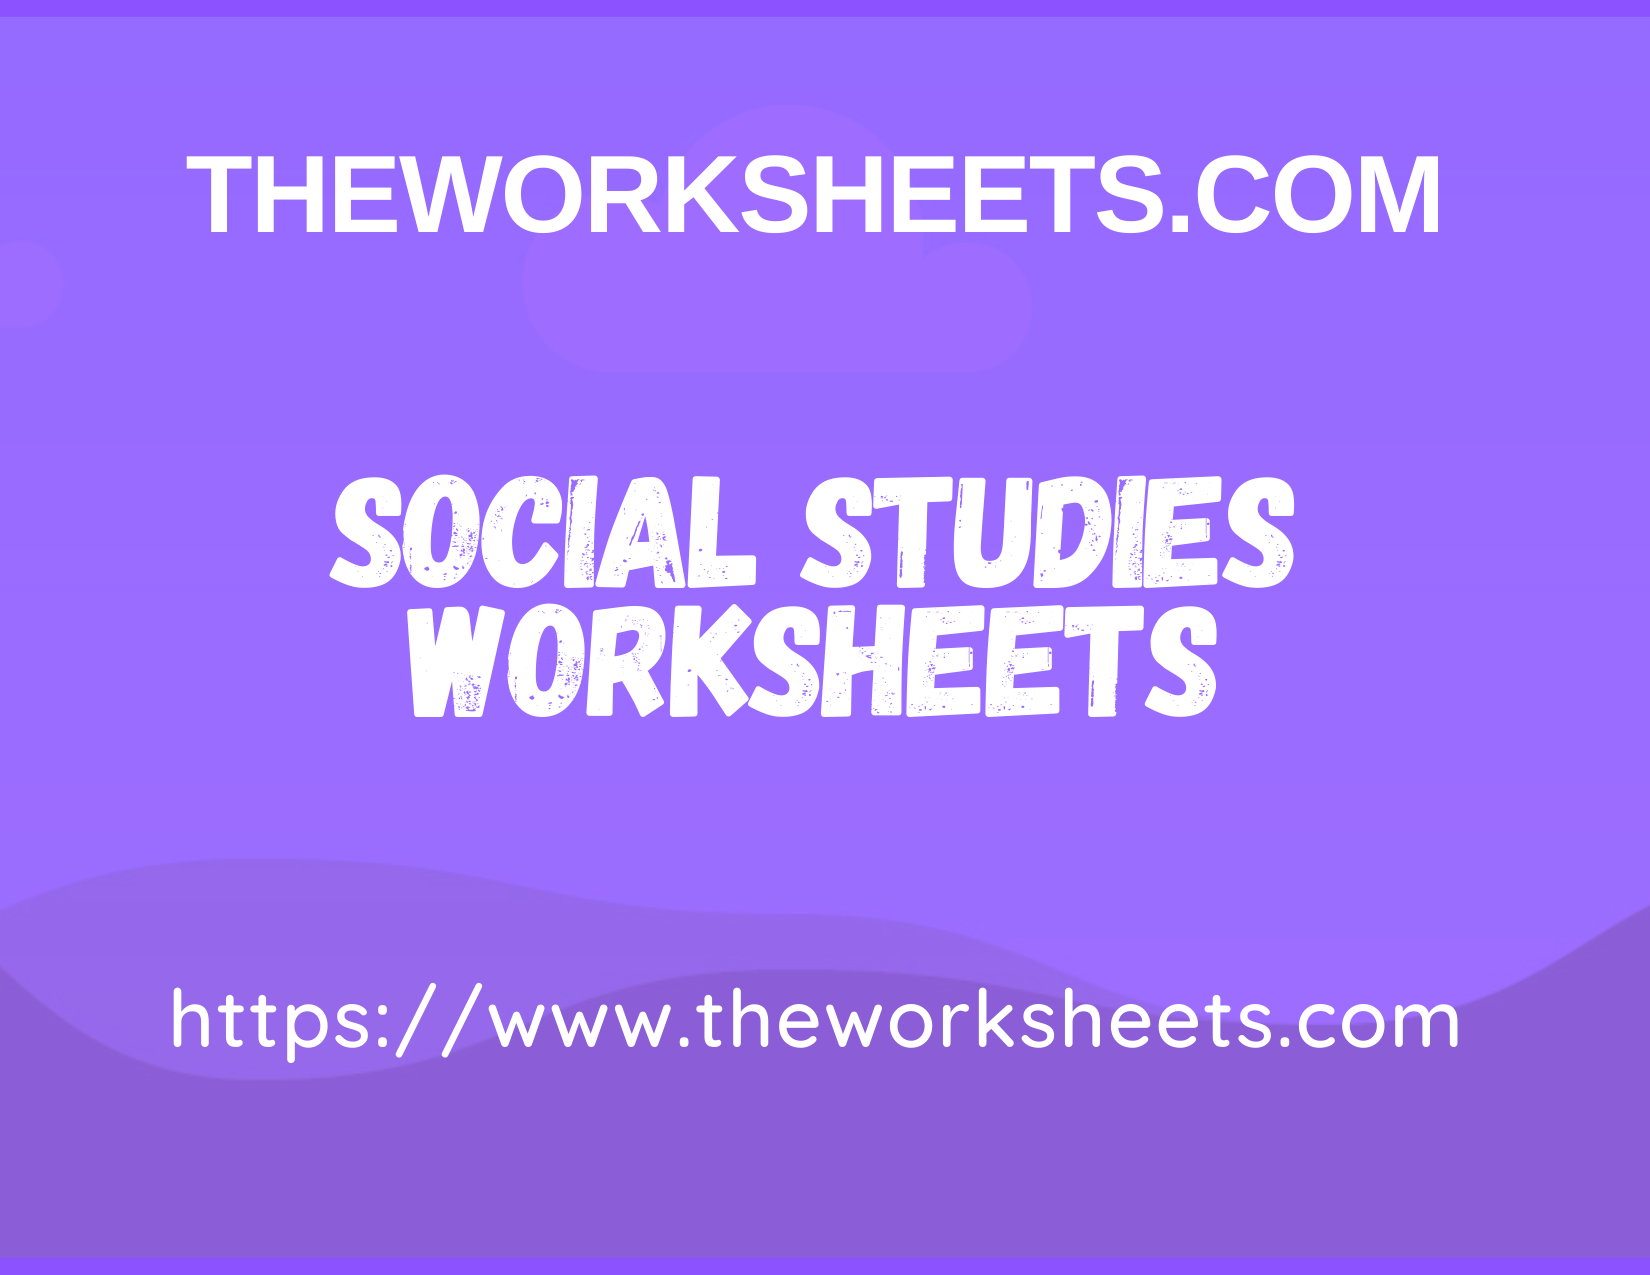 social studies worksheets by grades a solid collection of 10 grades and 8 searches theworksheets com